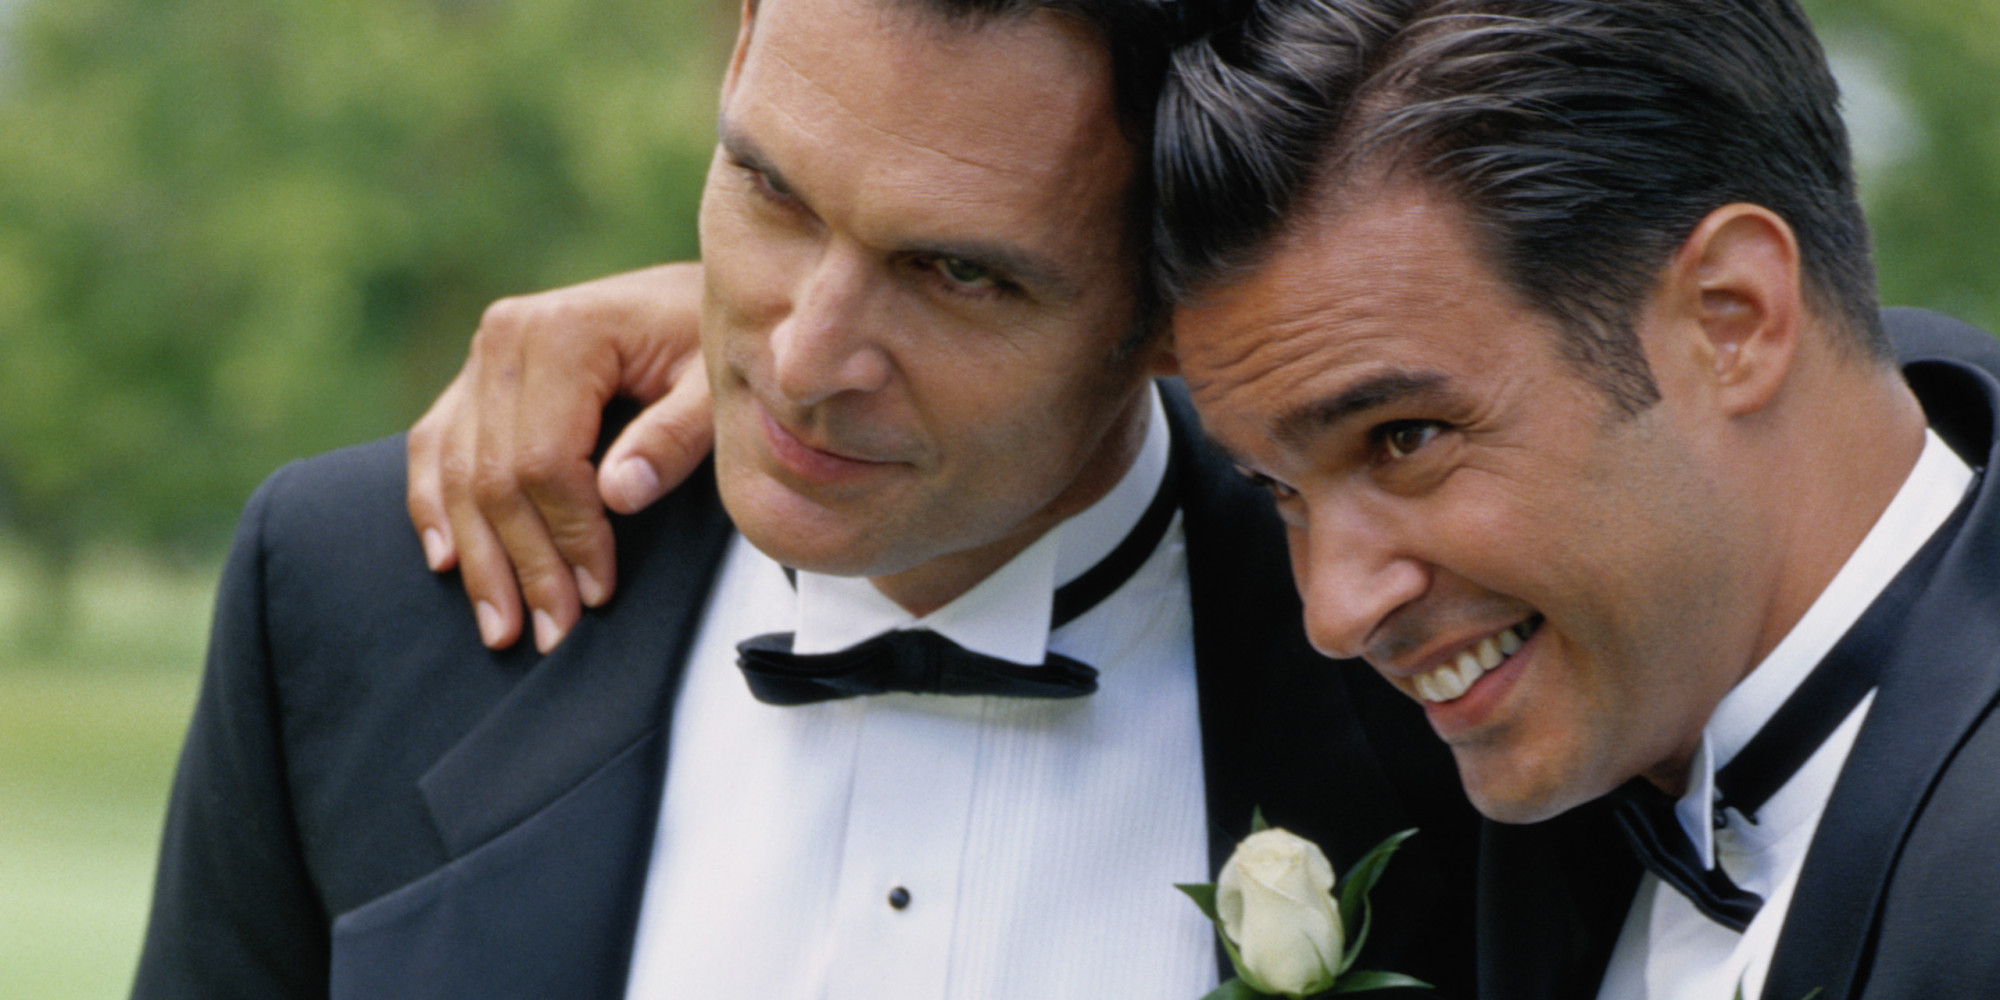 20 famous gay men who were once married